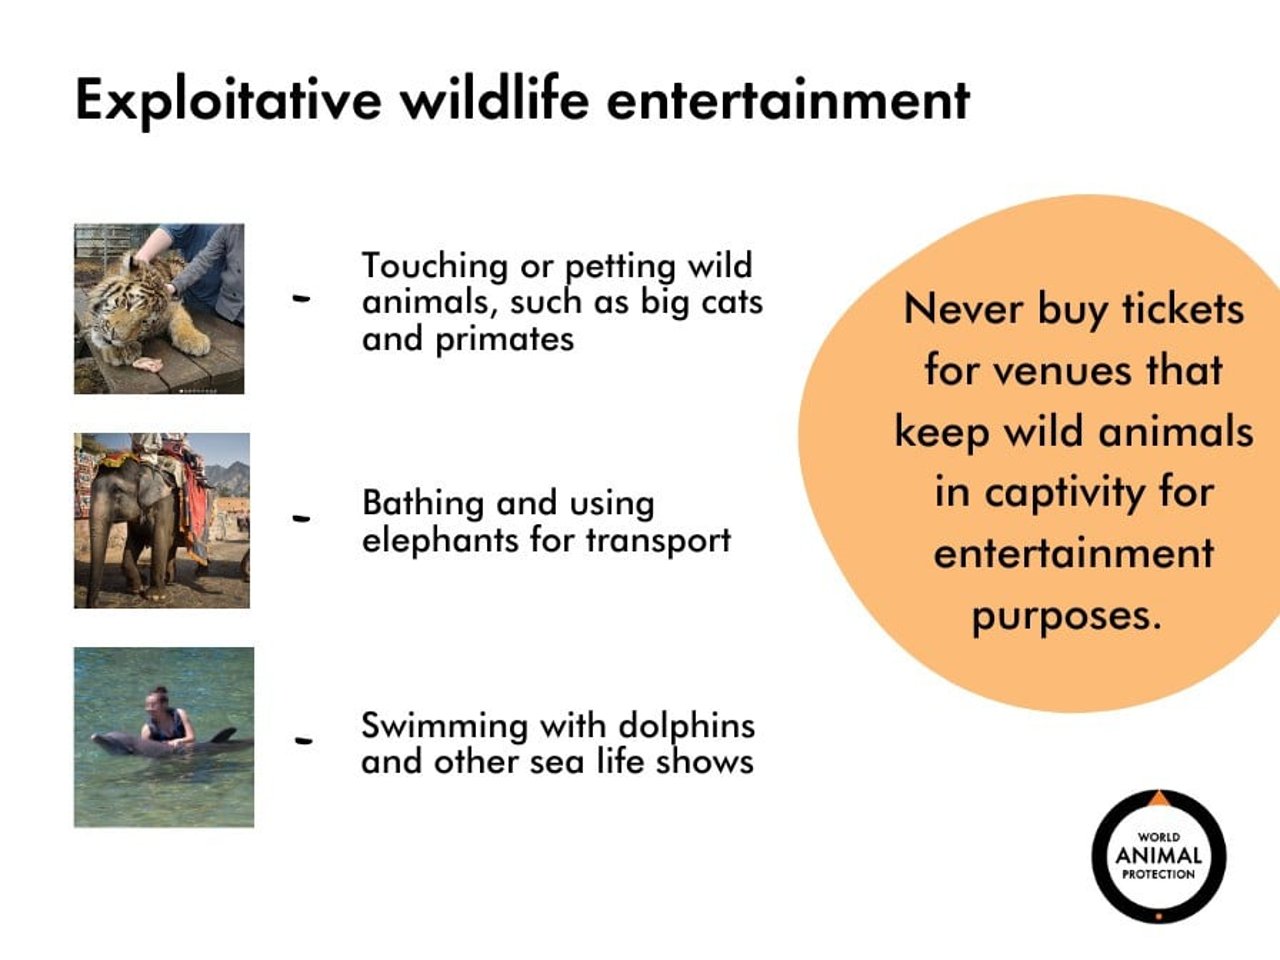 Exploitative wildlife entertainment. Touching or petting wild animals, such as big cats and primates. Bathing and using elephants for transport. Swimming with dolphins and other sea life shows. Never buy tickets for venues that keep wild animals in captivity for entertainment purposes. 